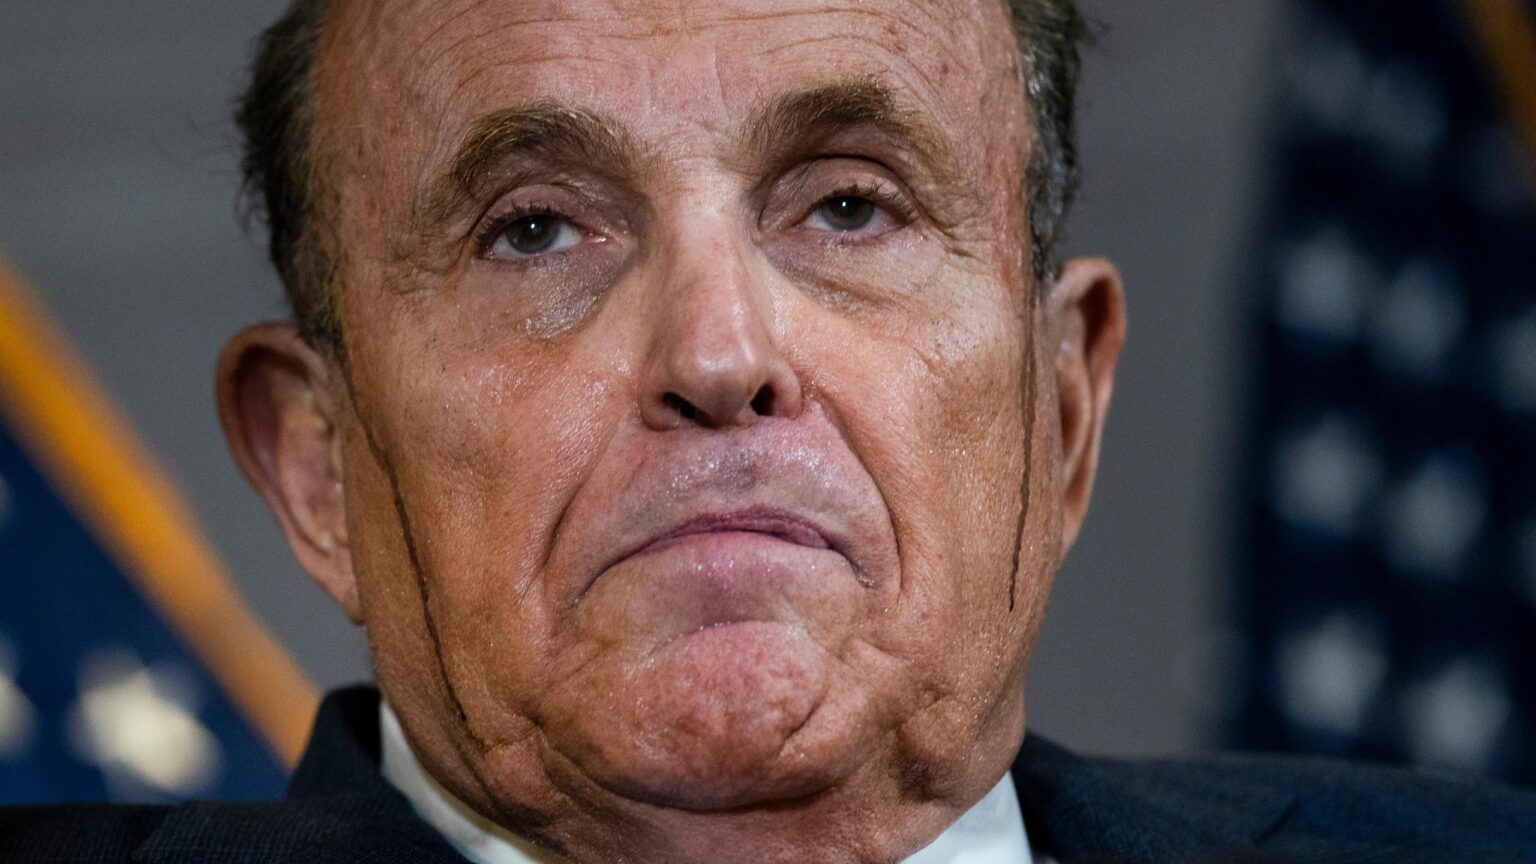 Rudy Giuliani, the ex-mayor of New York seems to keep taking a political tumble. Breaking a sweat there, Rudy? It certainly seems like he's breaking something.